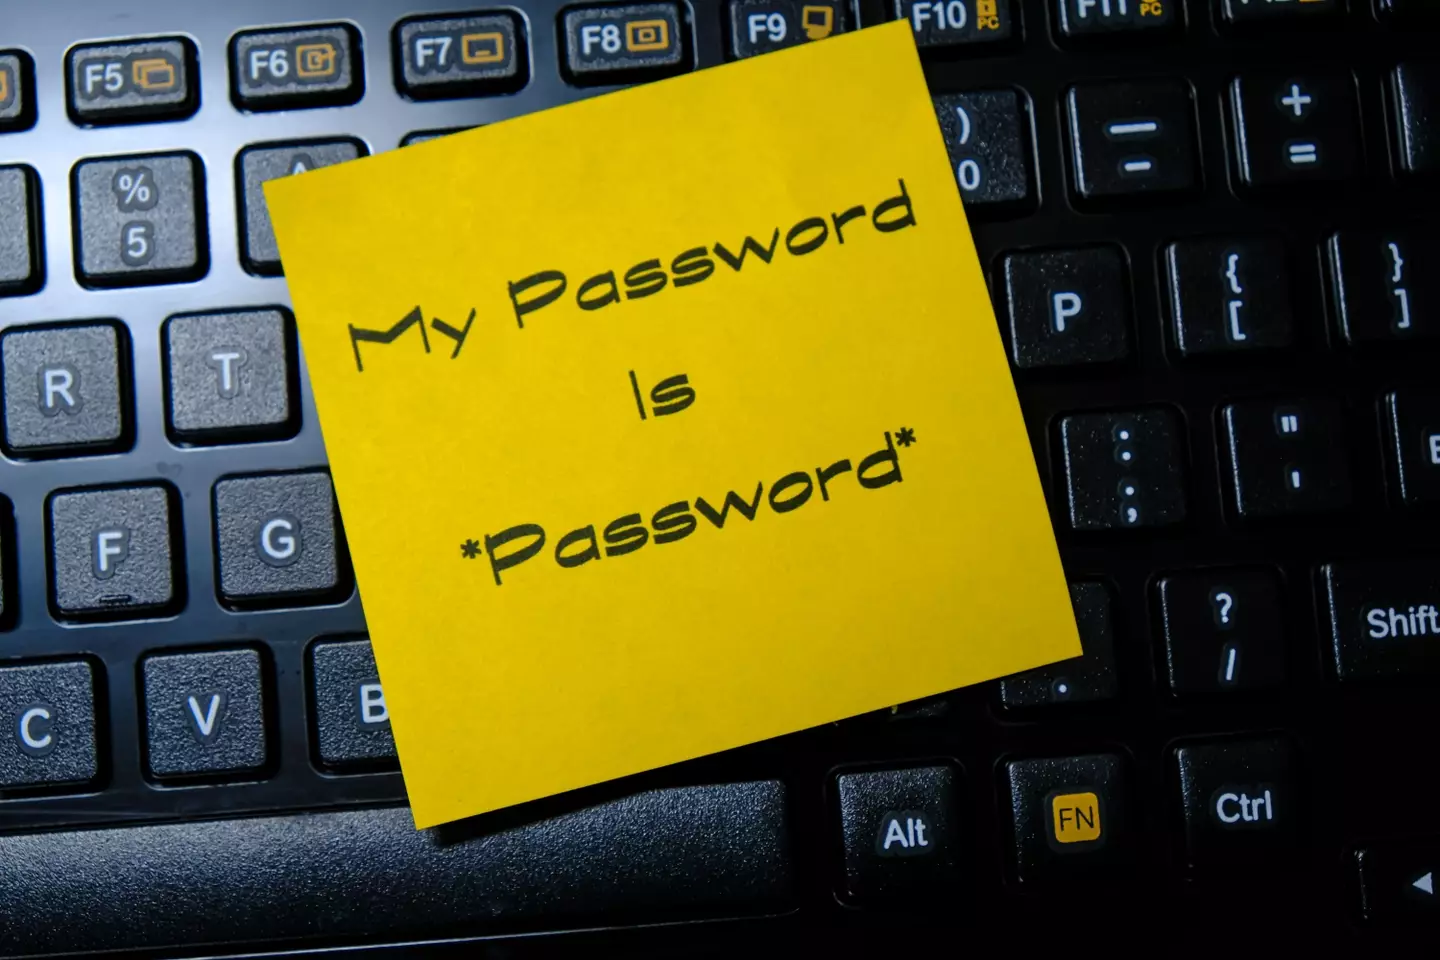 This is a bad password.